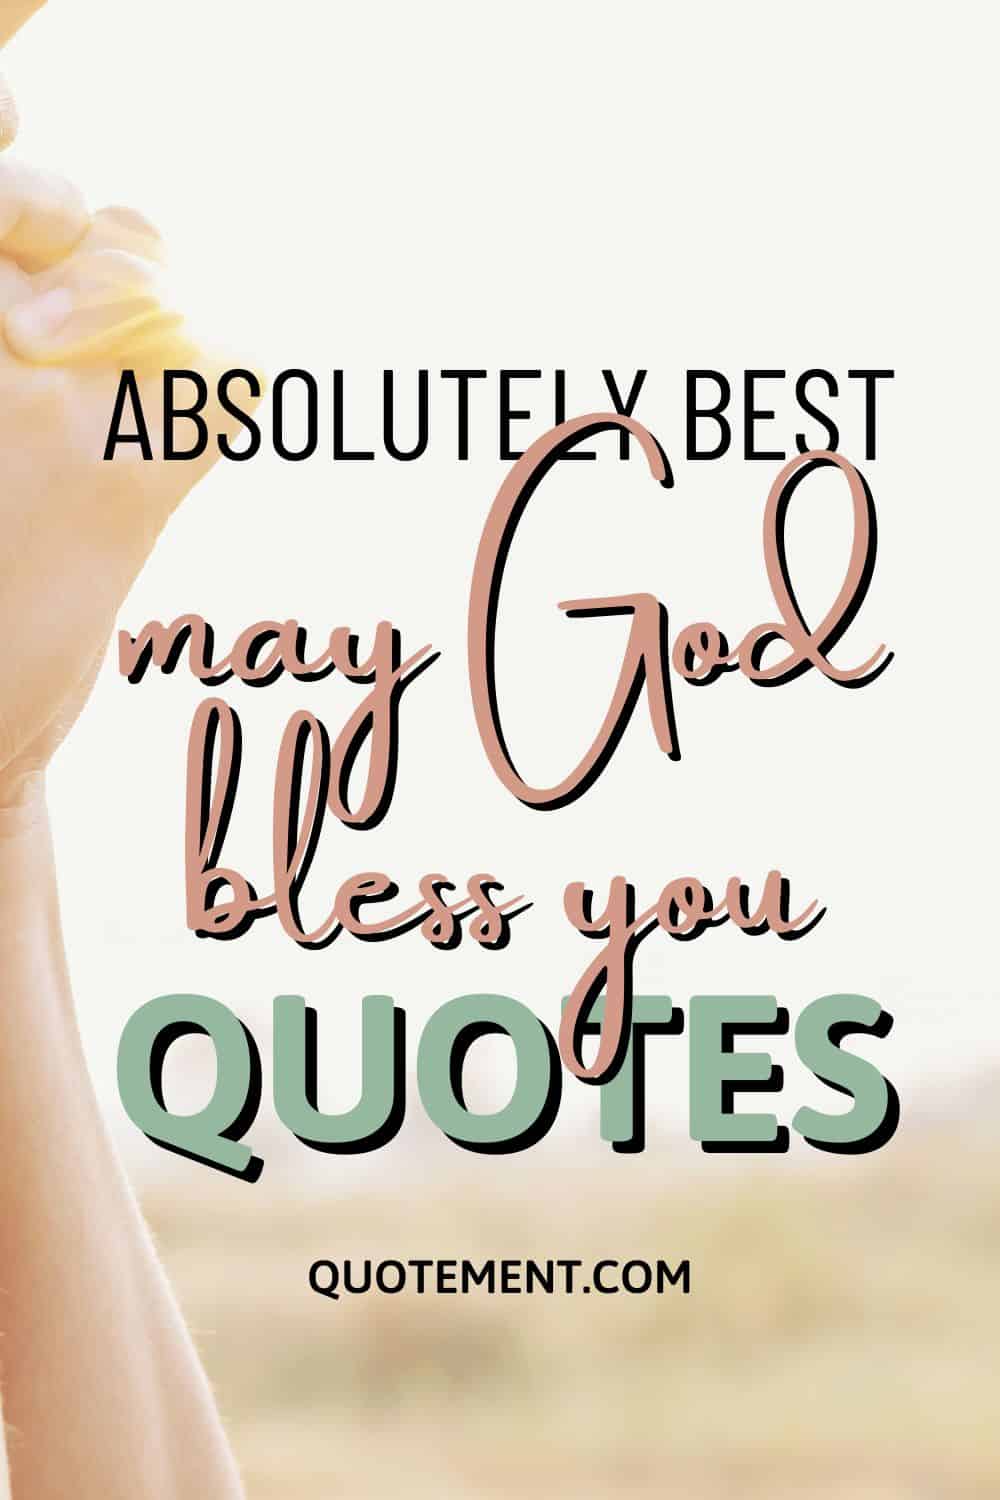 70 Beautiful May God Bless You Quotes For Your Loved Ones